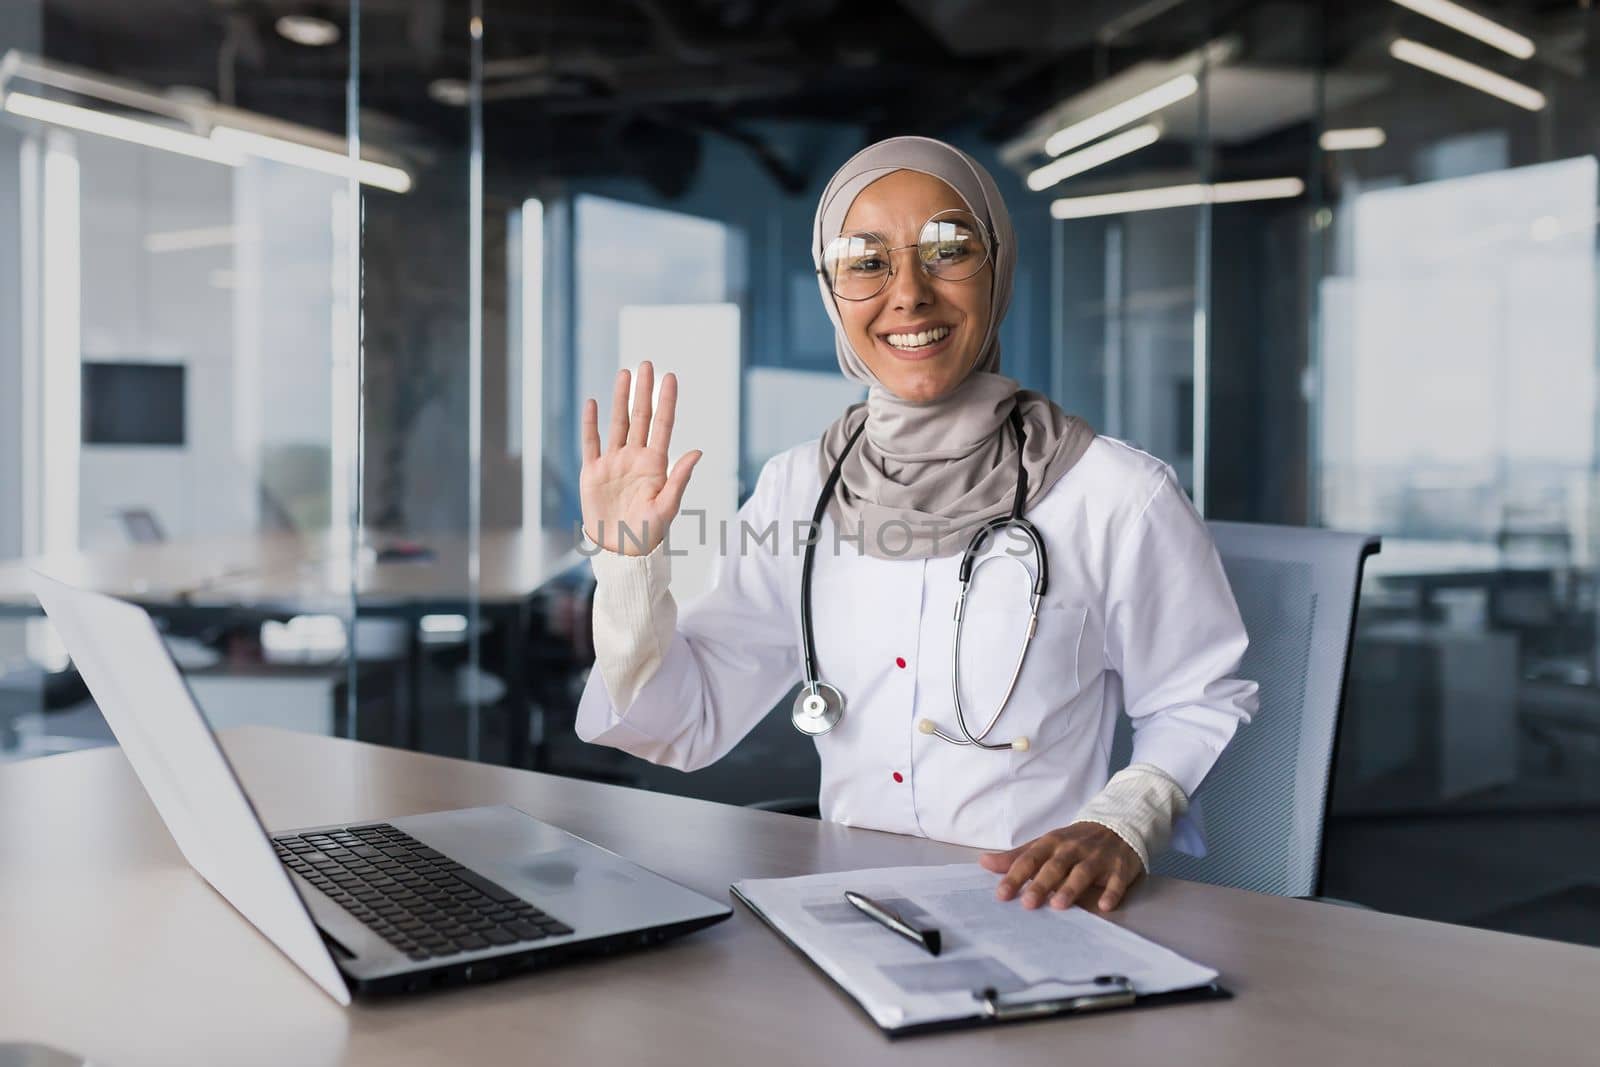 A young beautiful Arab woman, a Muslim doctor is sitting in the office at the desk in a hijab. He waves his hand at the camera, greets his patients, smiles.